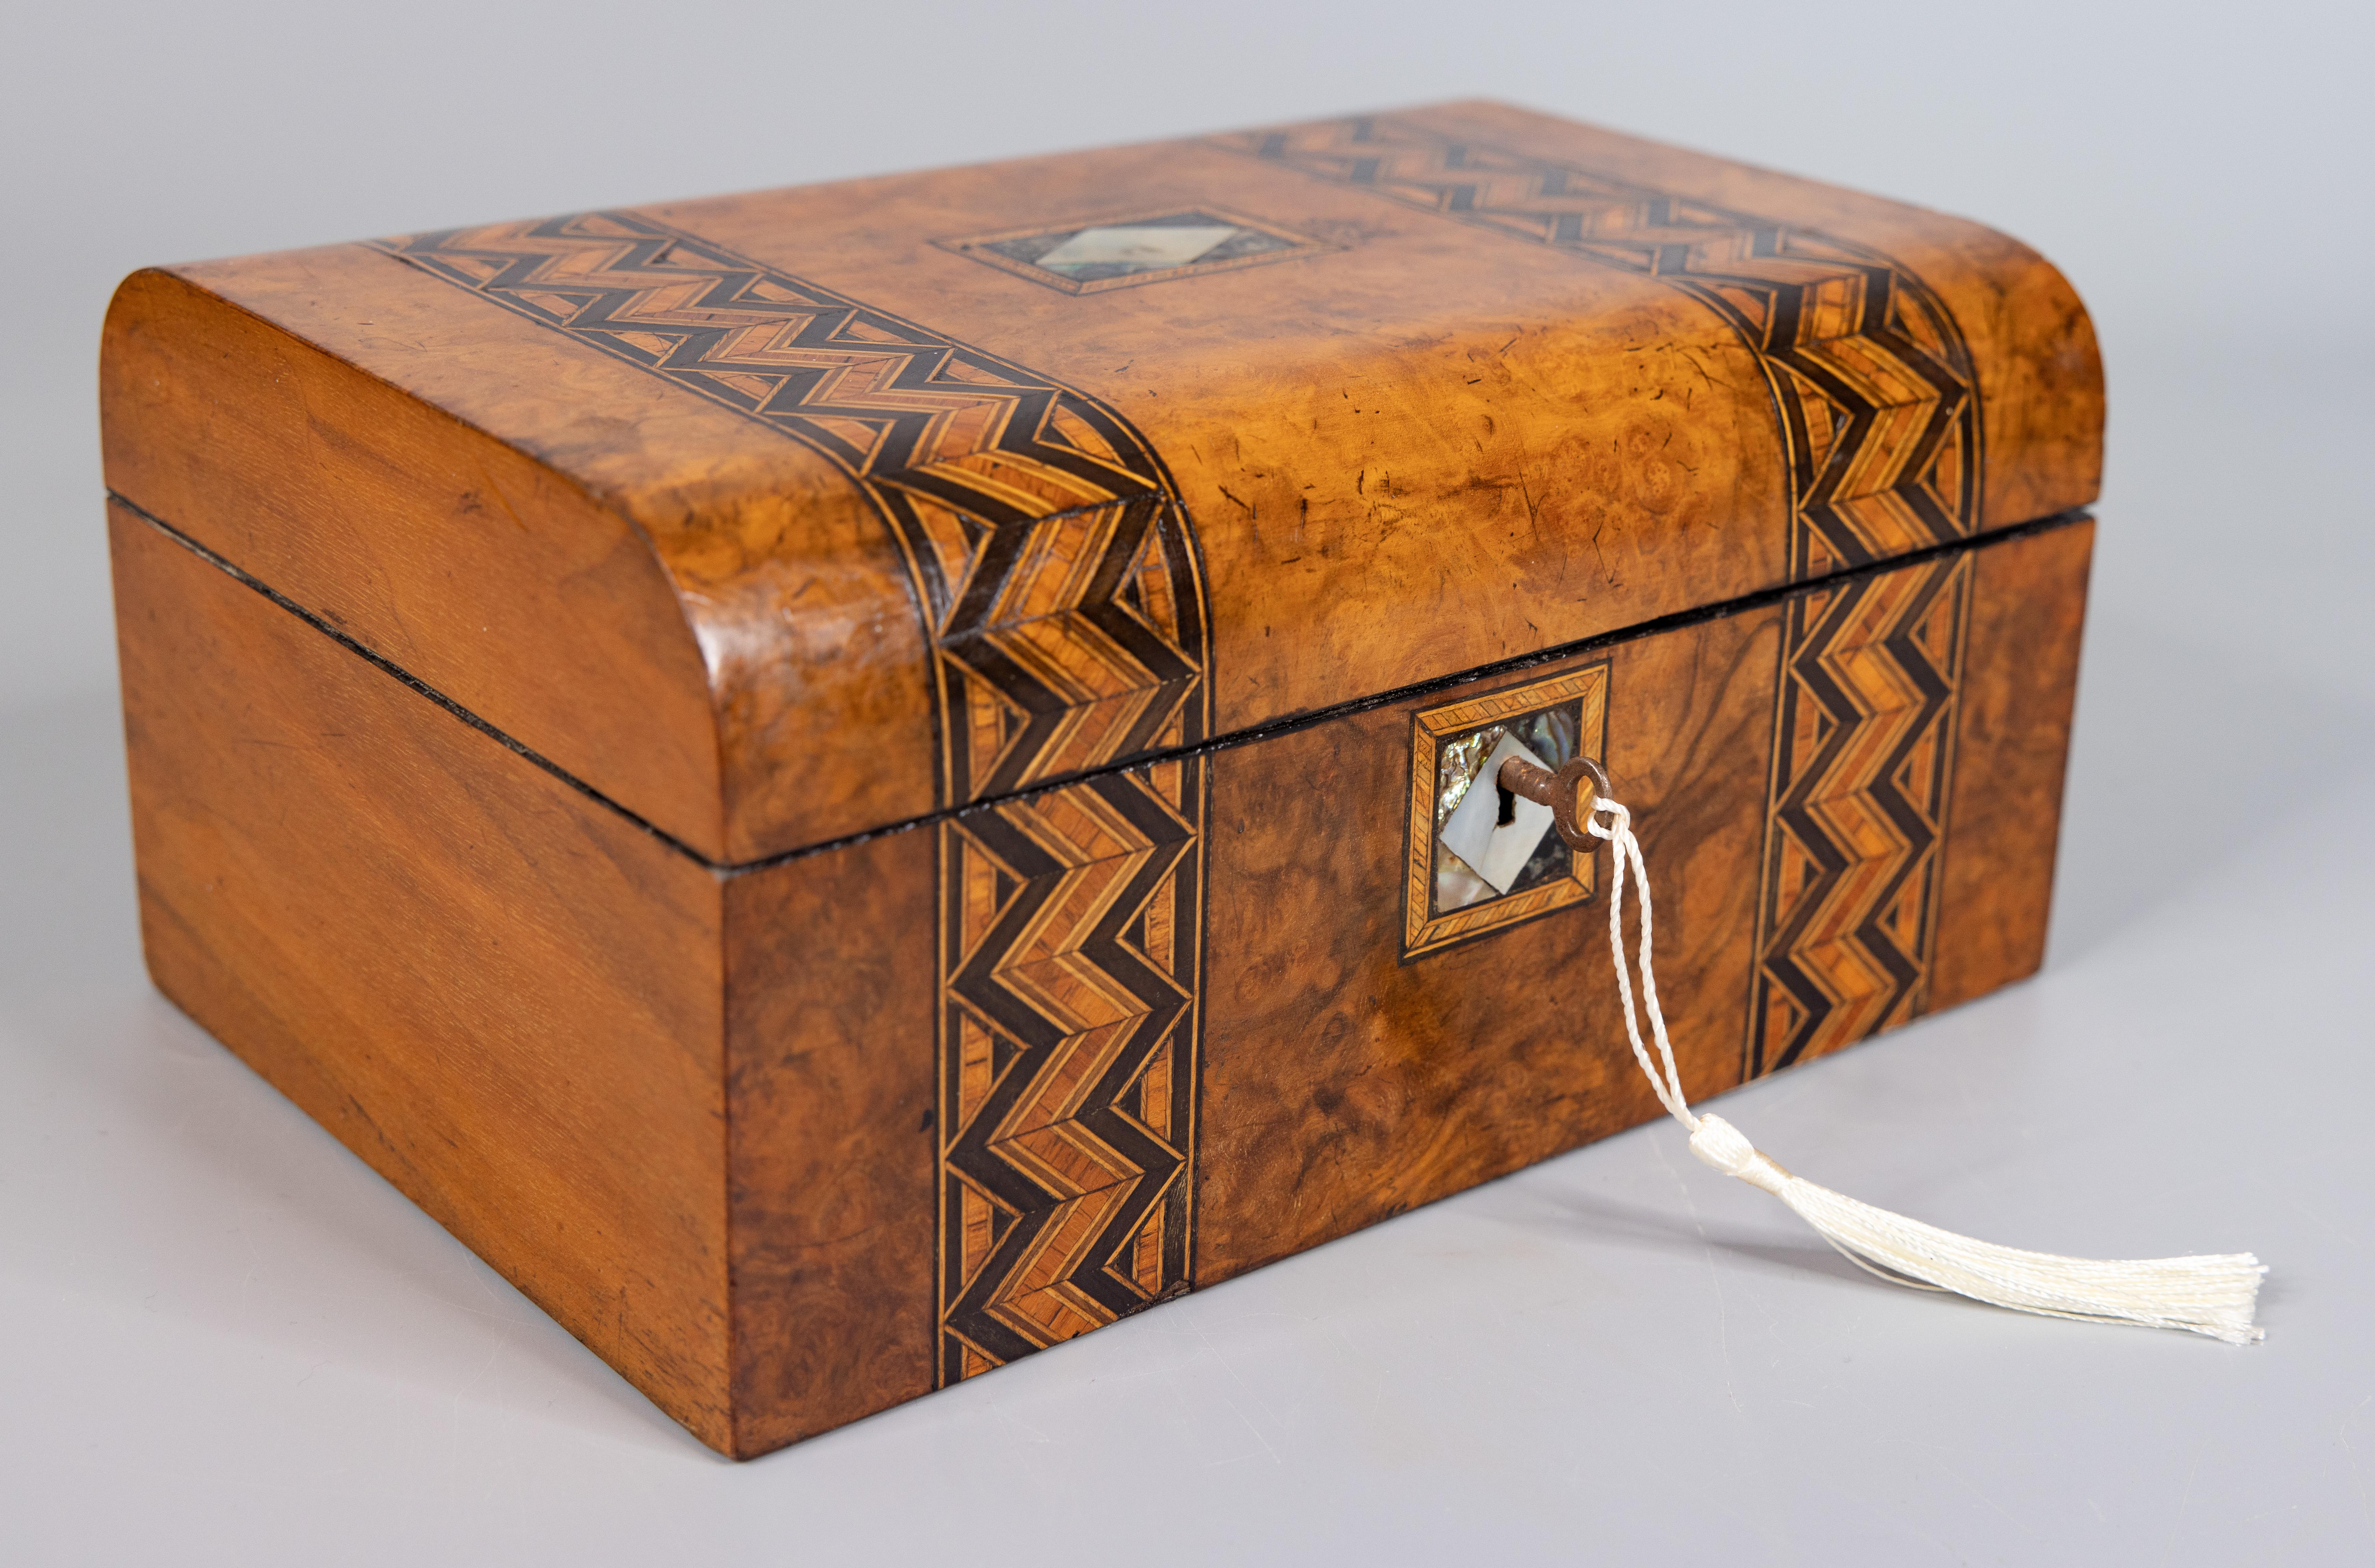 A superb 19th century English figured walnut box with lock and key, circa 1880. This fine antique box has a wonderful domed lid accented with tunbridge bands along the top and front with a mother of pearl center and key plate. This hand crafted box